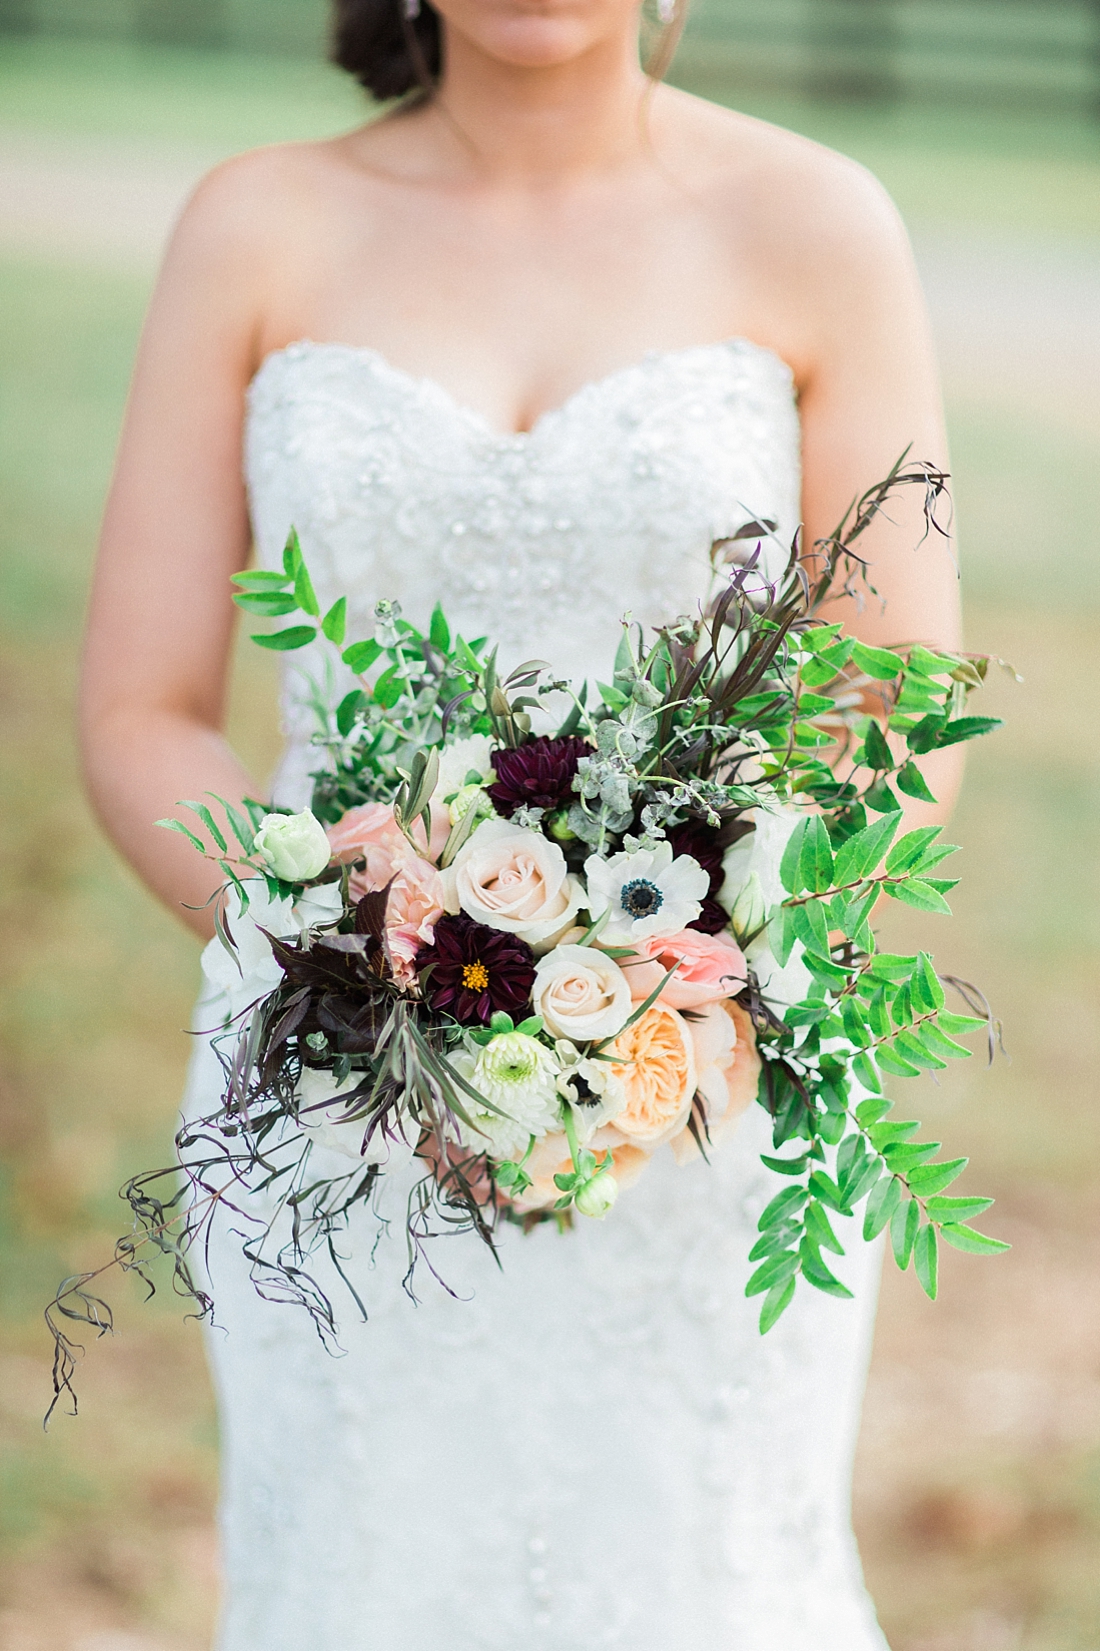 Rustic deconstructed fall bouquet by Dear Sweetheart Events | Abby Grace